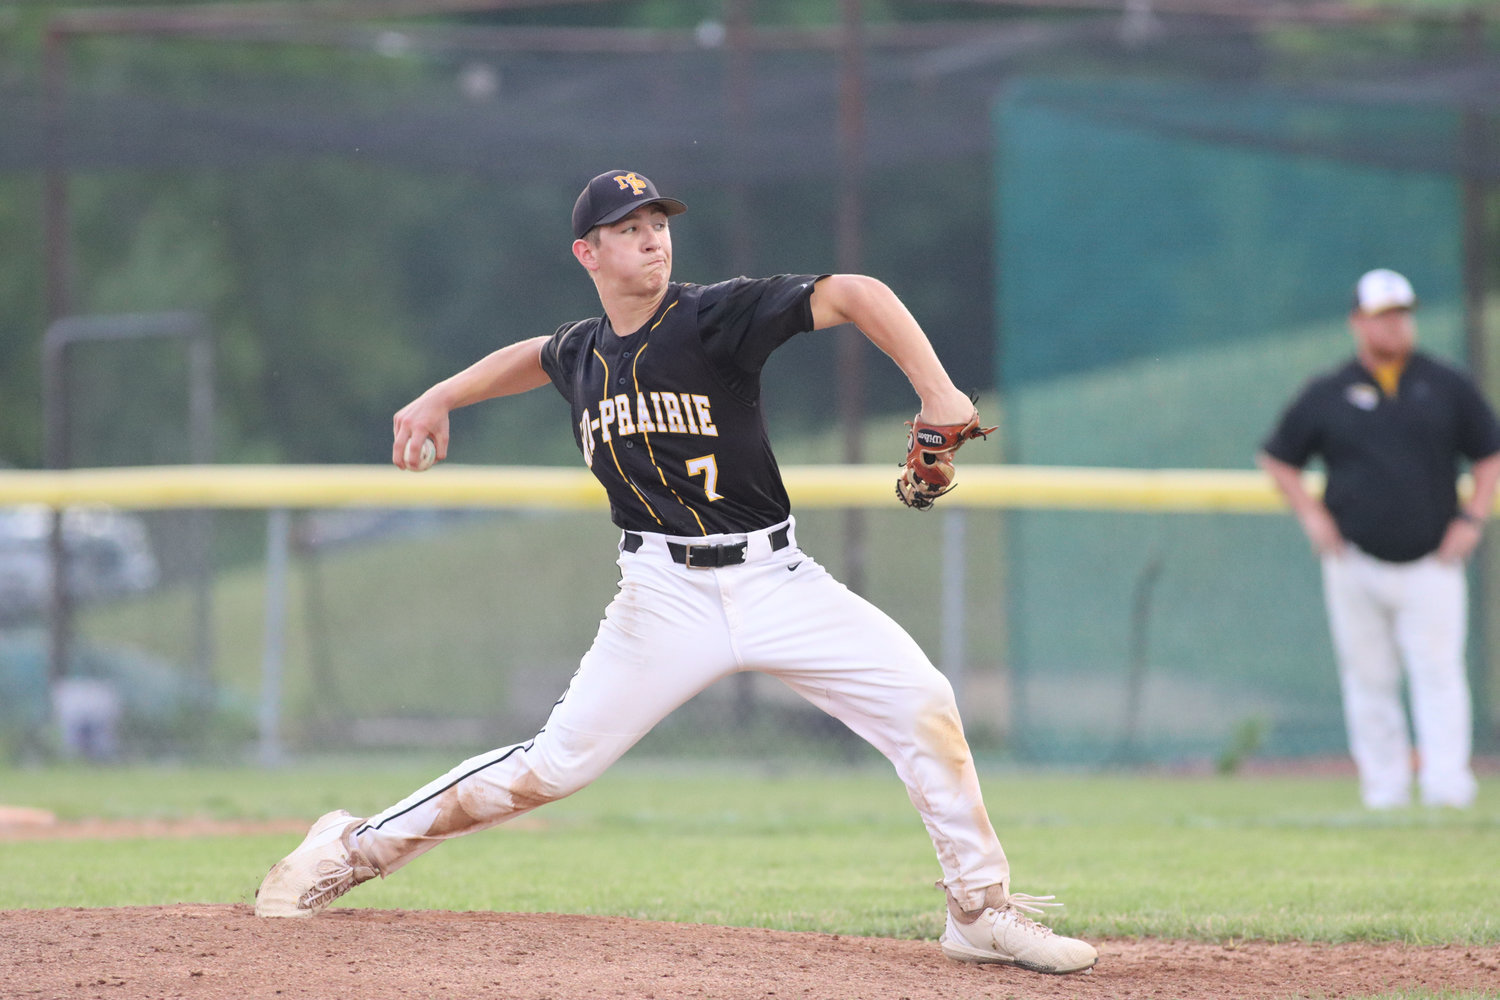 Karson Grout delivers a pitch during a Mid-Prairie win over Tipton on June 28, 2021.